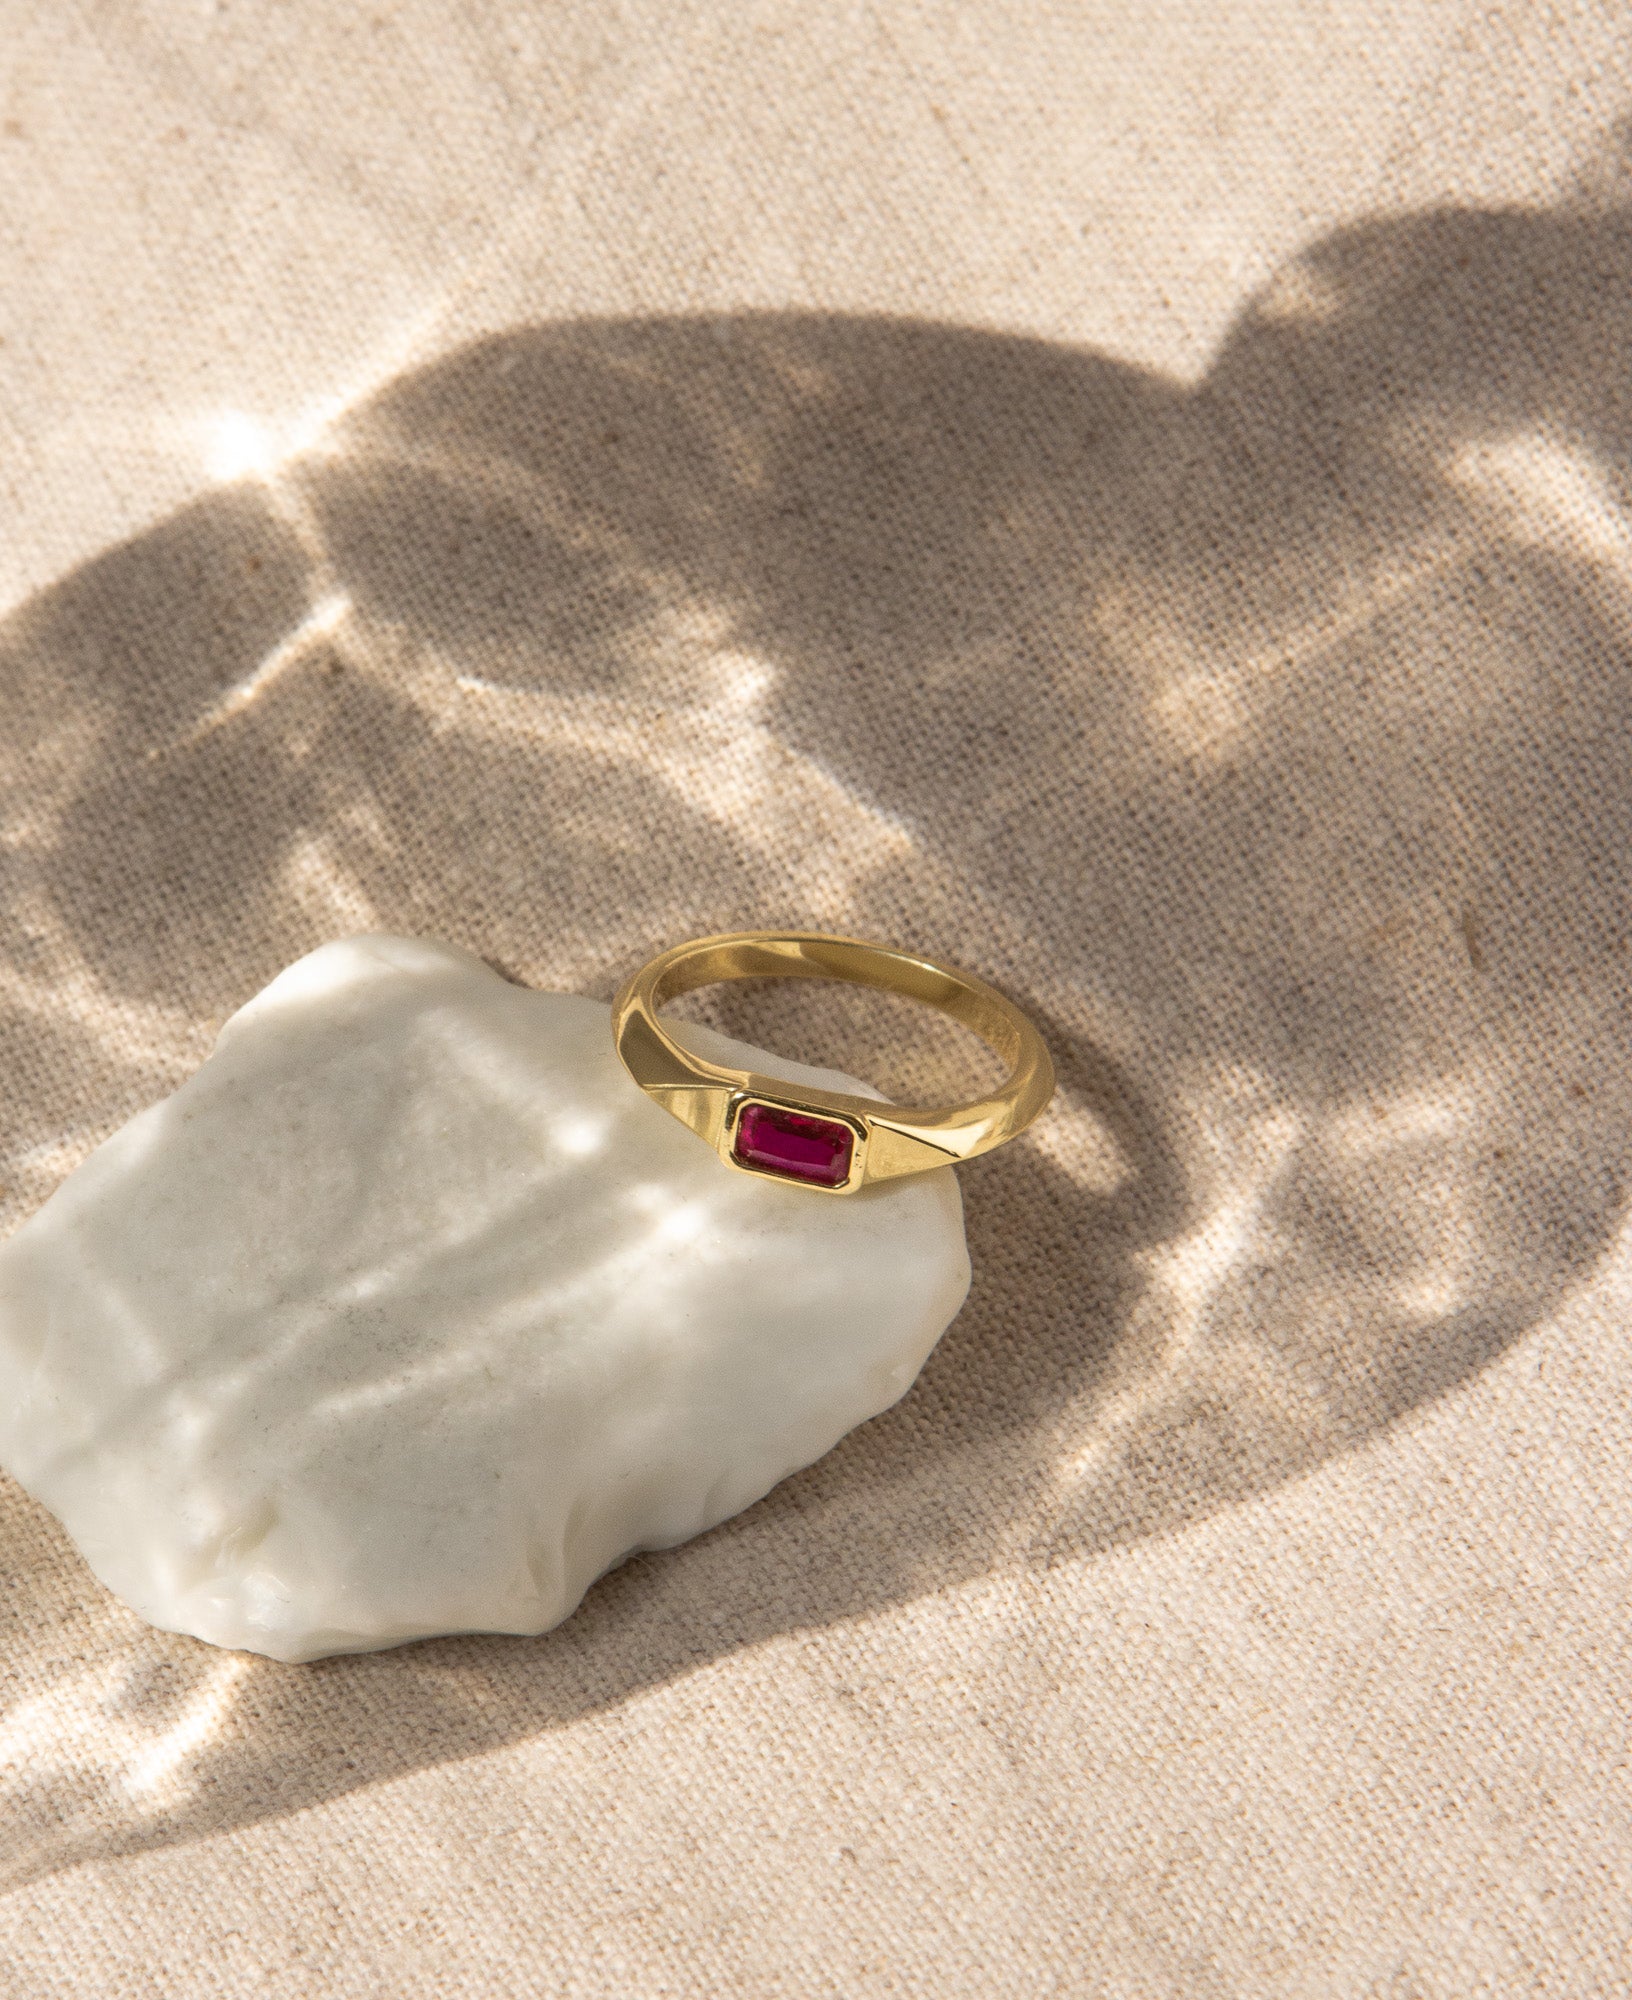 close up of the winnie baguette signet ring with ruby cubic zirconia stone details